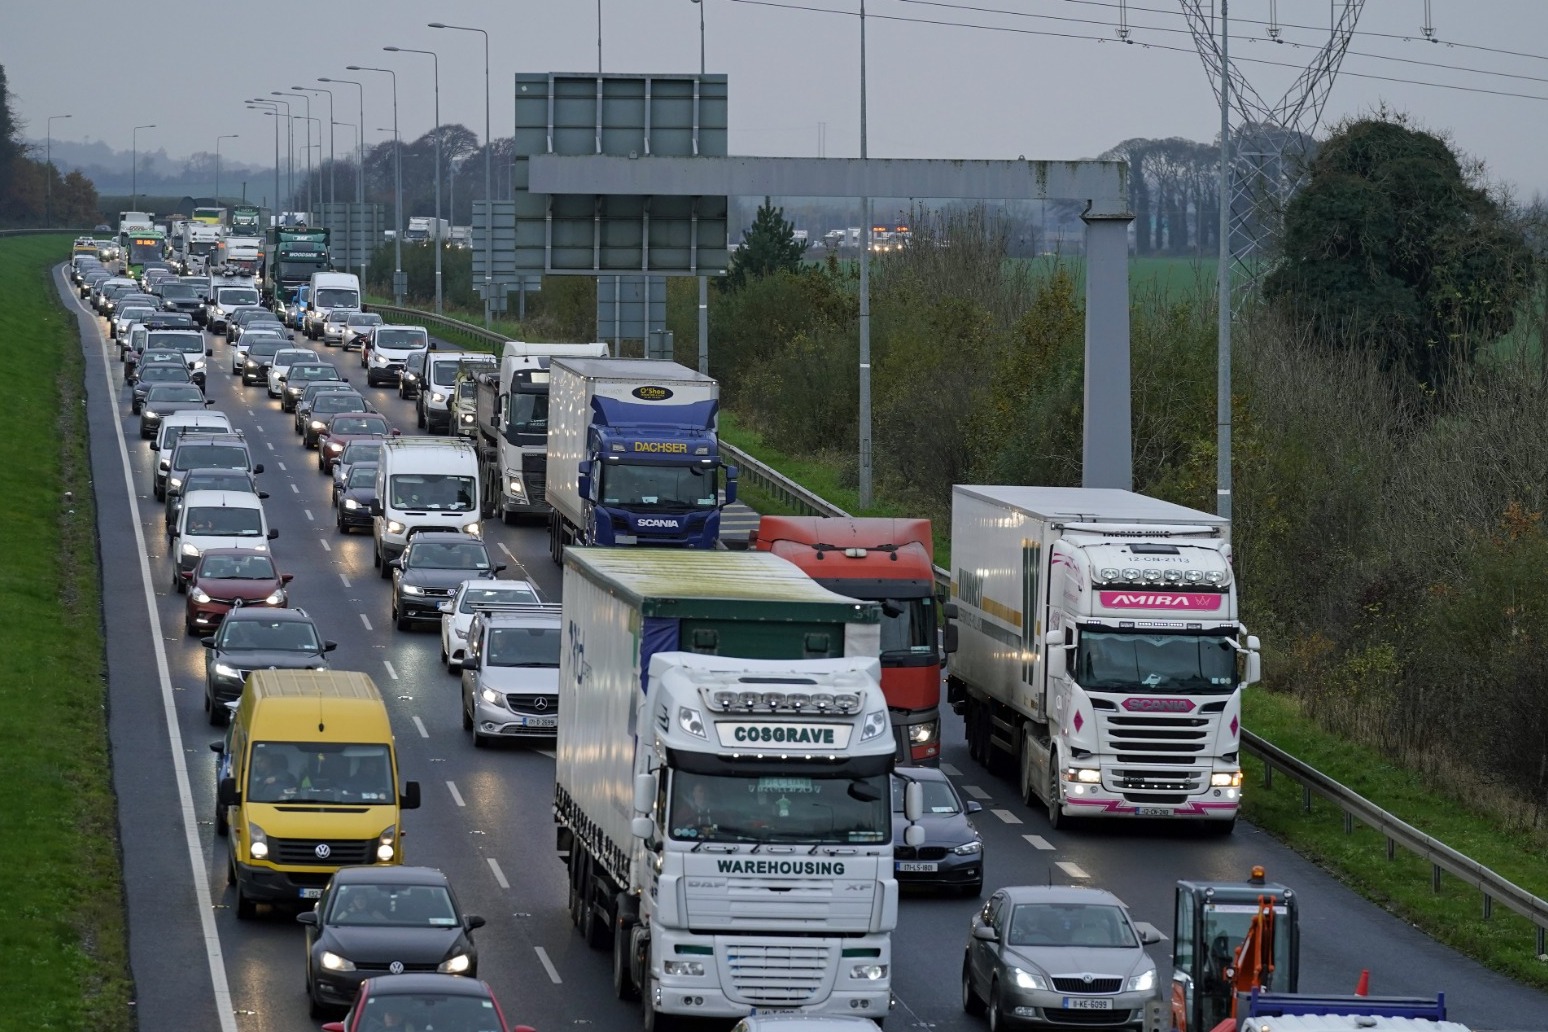 Motorists warned of long queues as millions embark on Christmas trips 